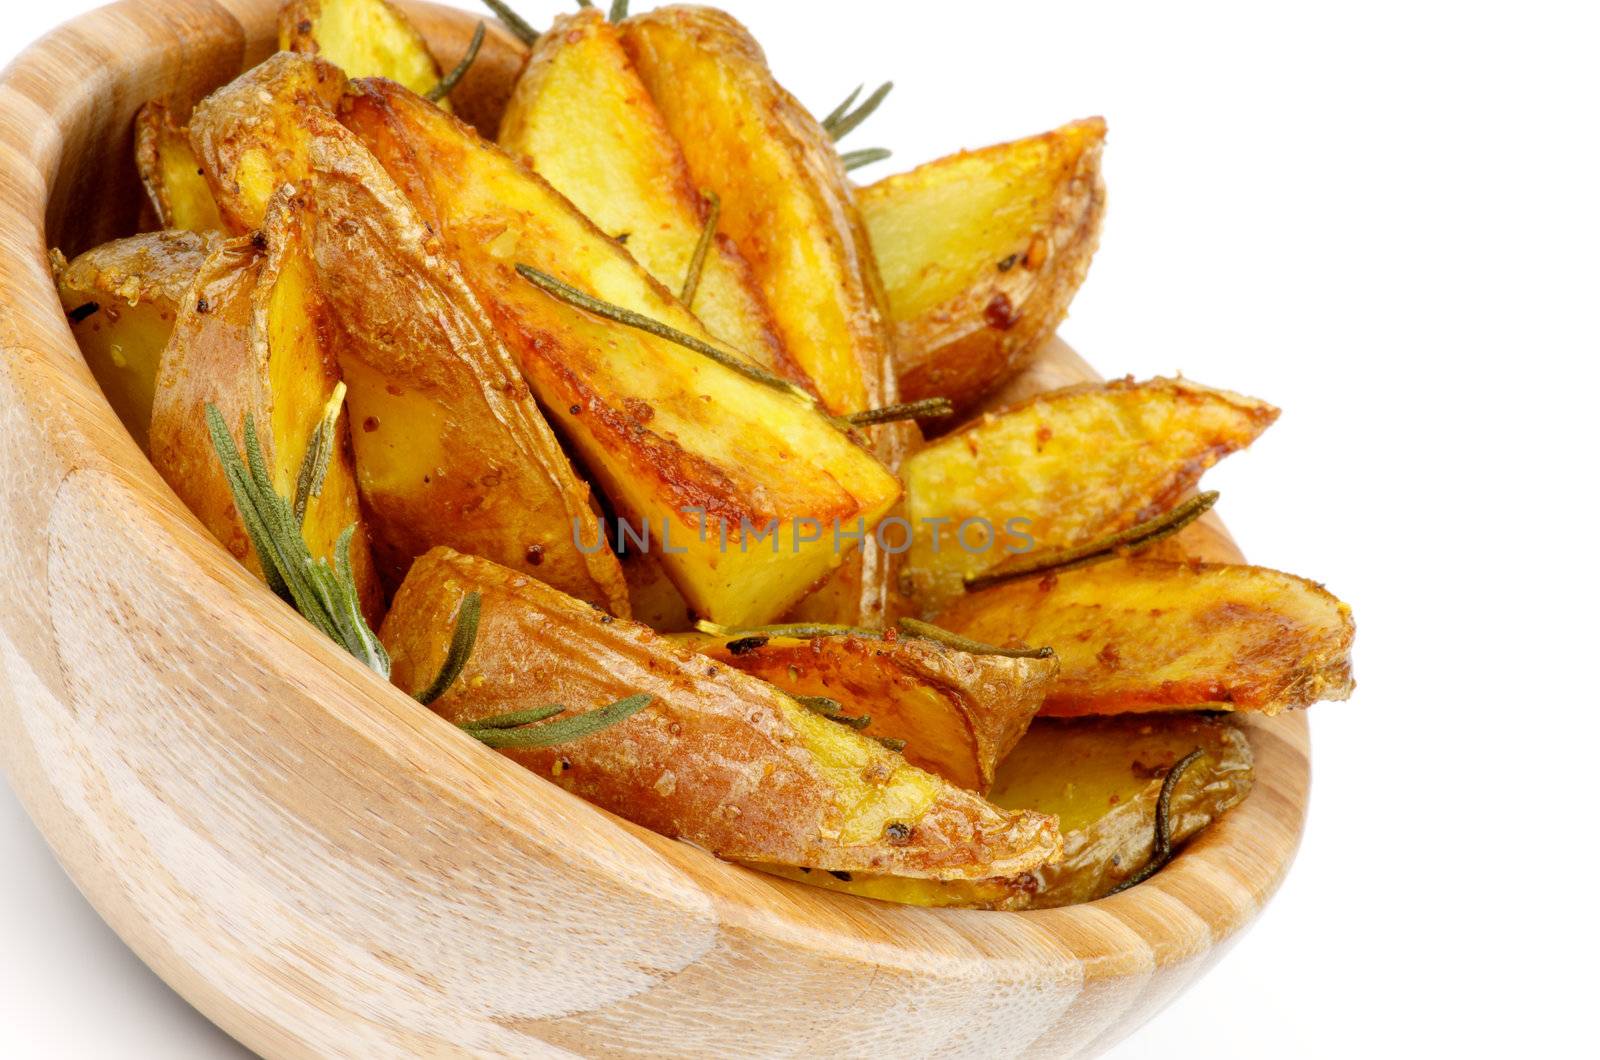 Wooden Bowl with Roasted in Rosemary Potato Wedges closeup on white background